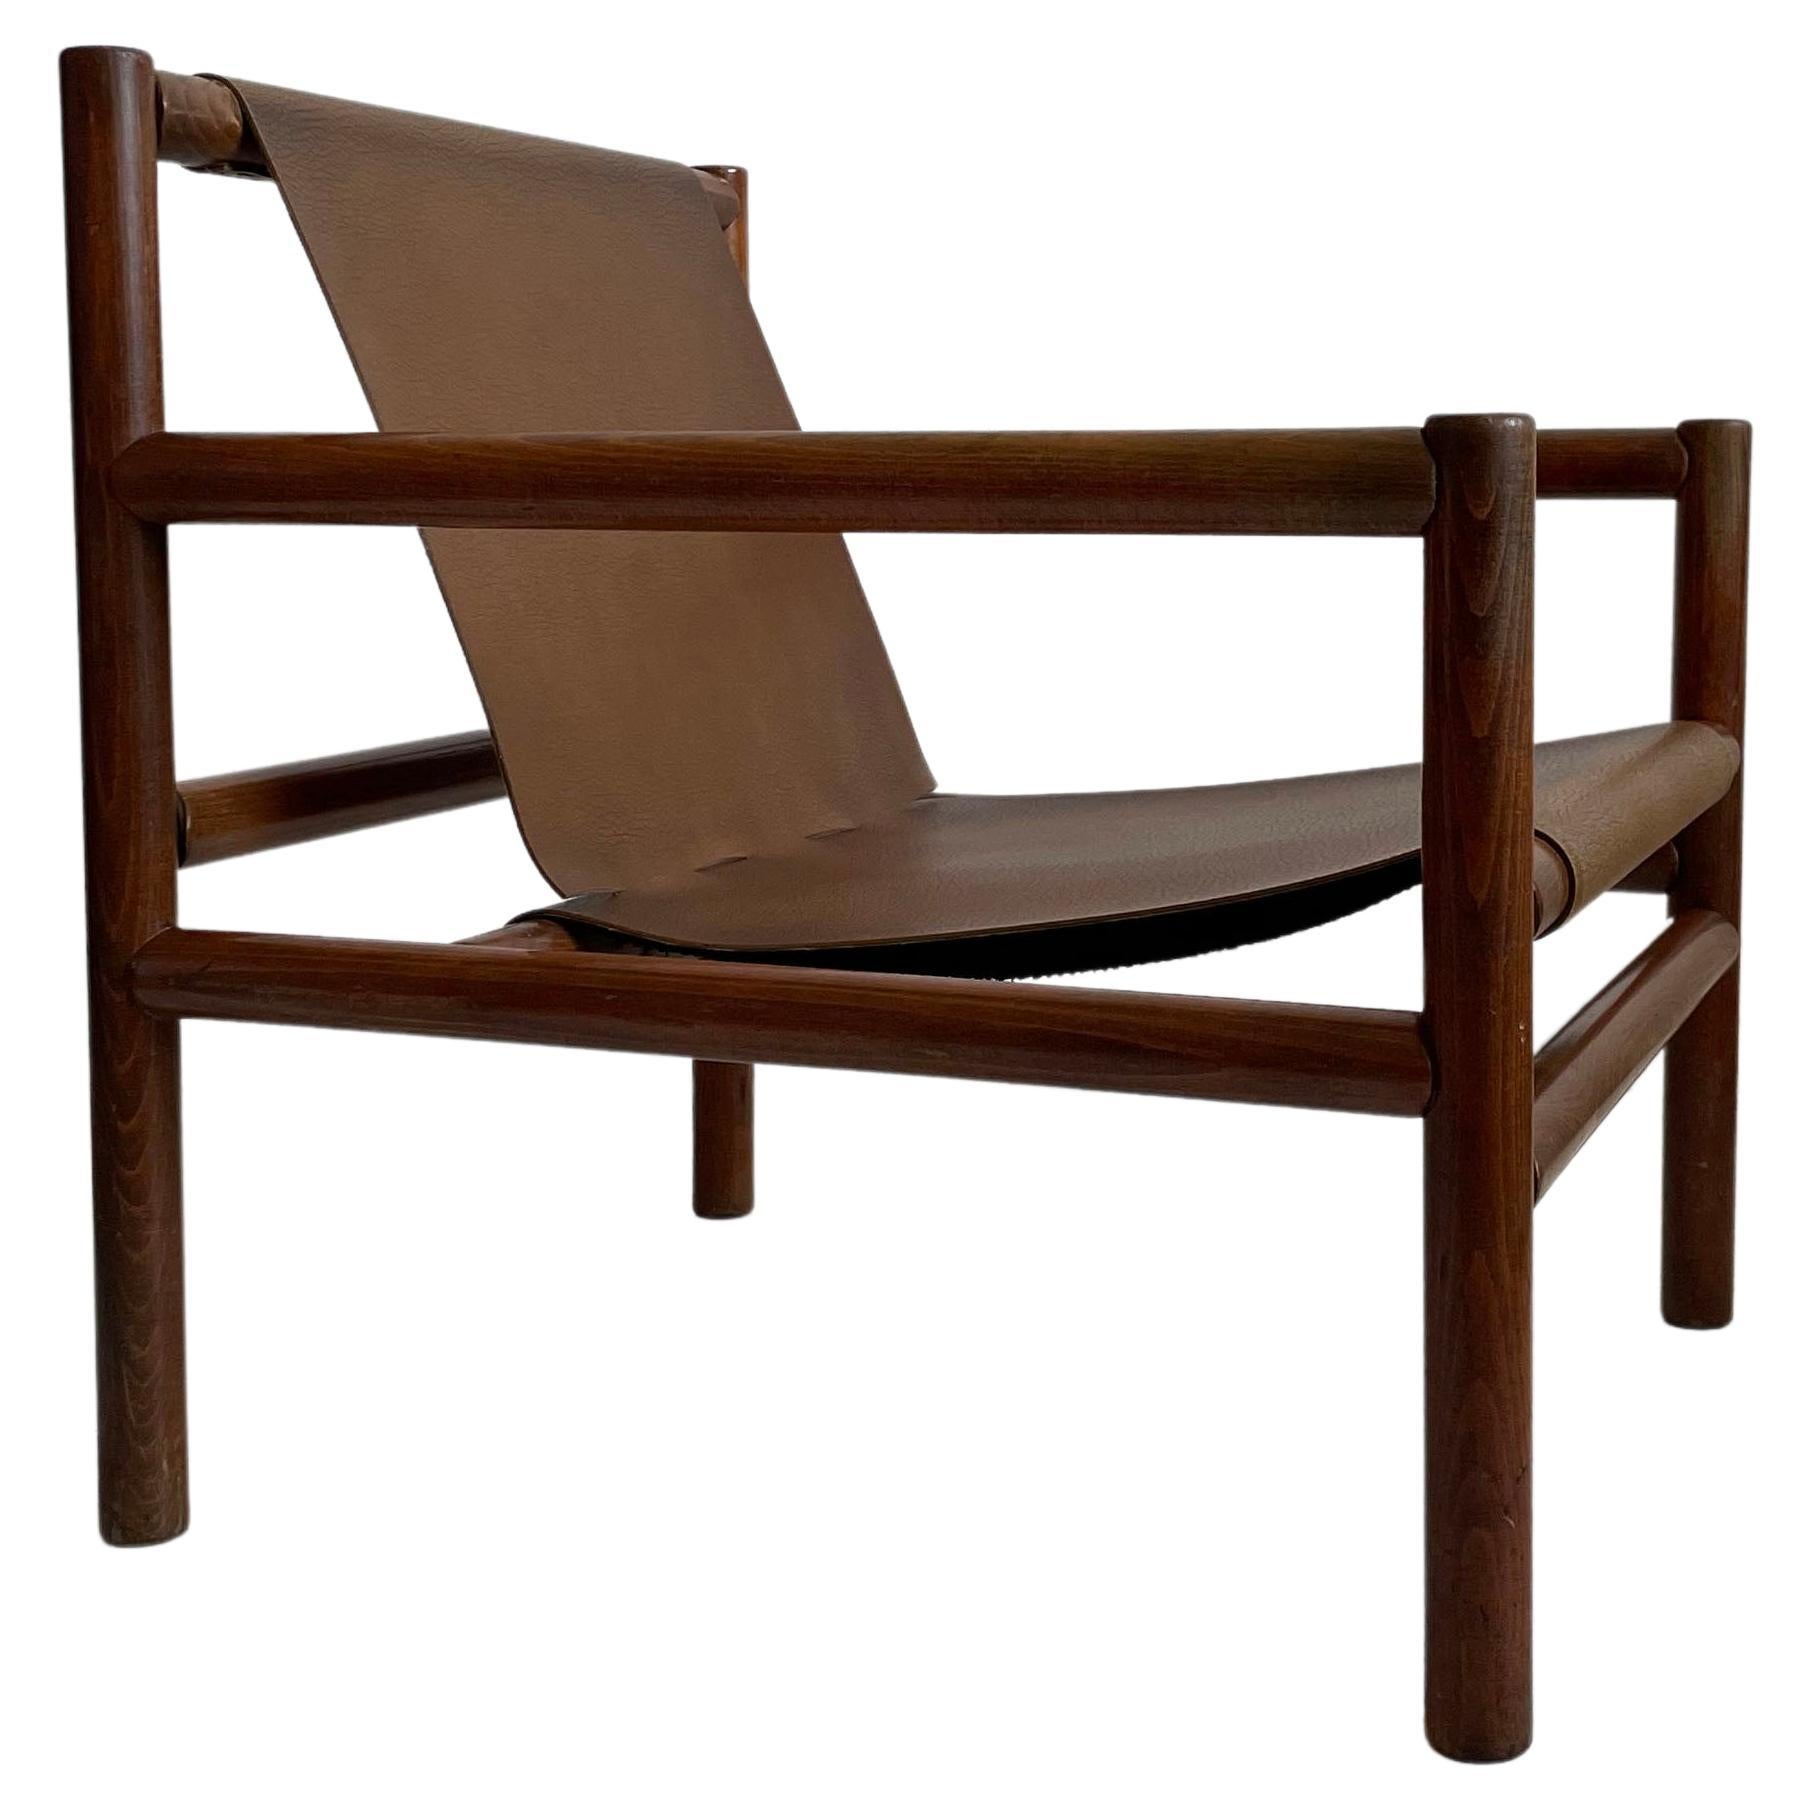 Mid-Century Modern Wooden Armchair, Faux Leather Seating, Stol Kamnik 1970s